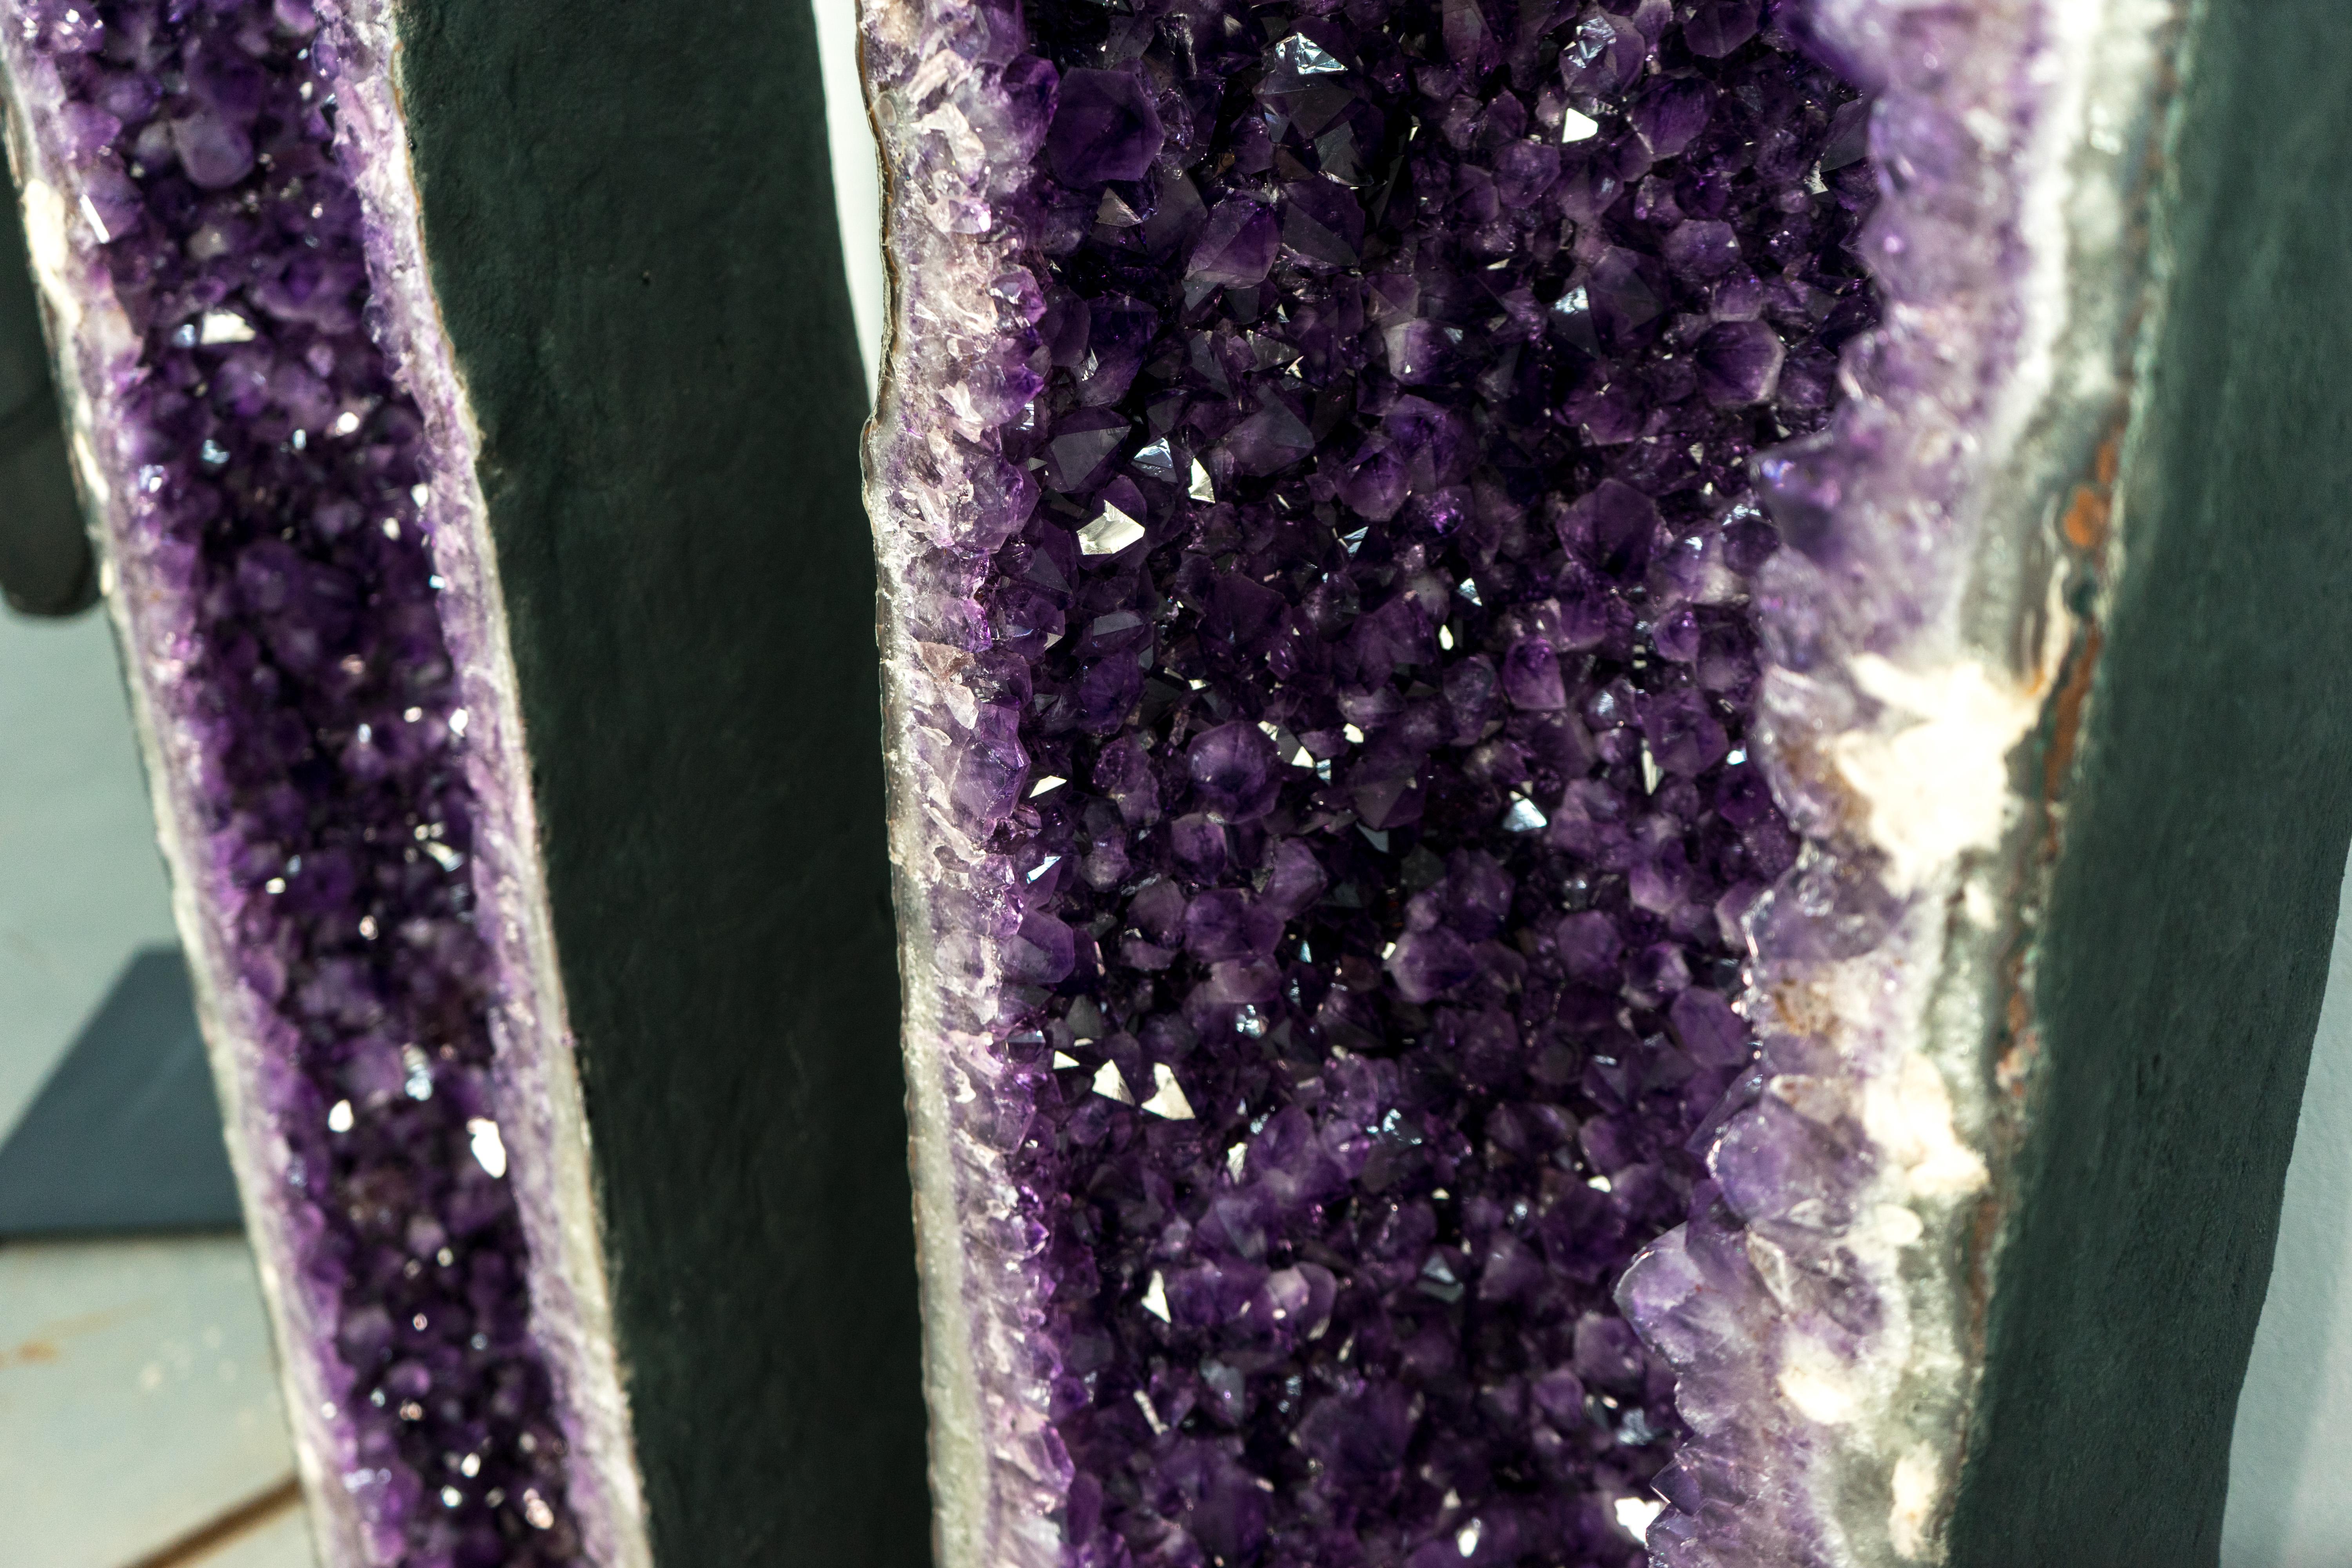 Brazilian Pair of 8 Ft Tall Giant High-Grade Deep Purple Amethyst Cathedral Geodes For Sale